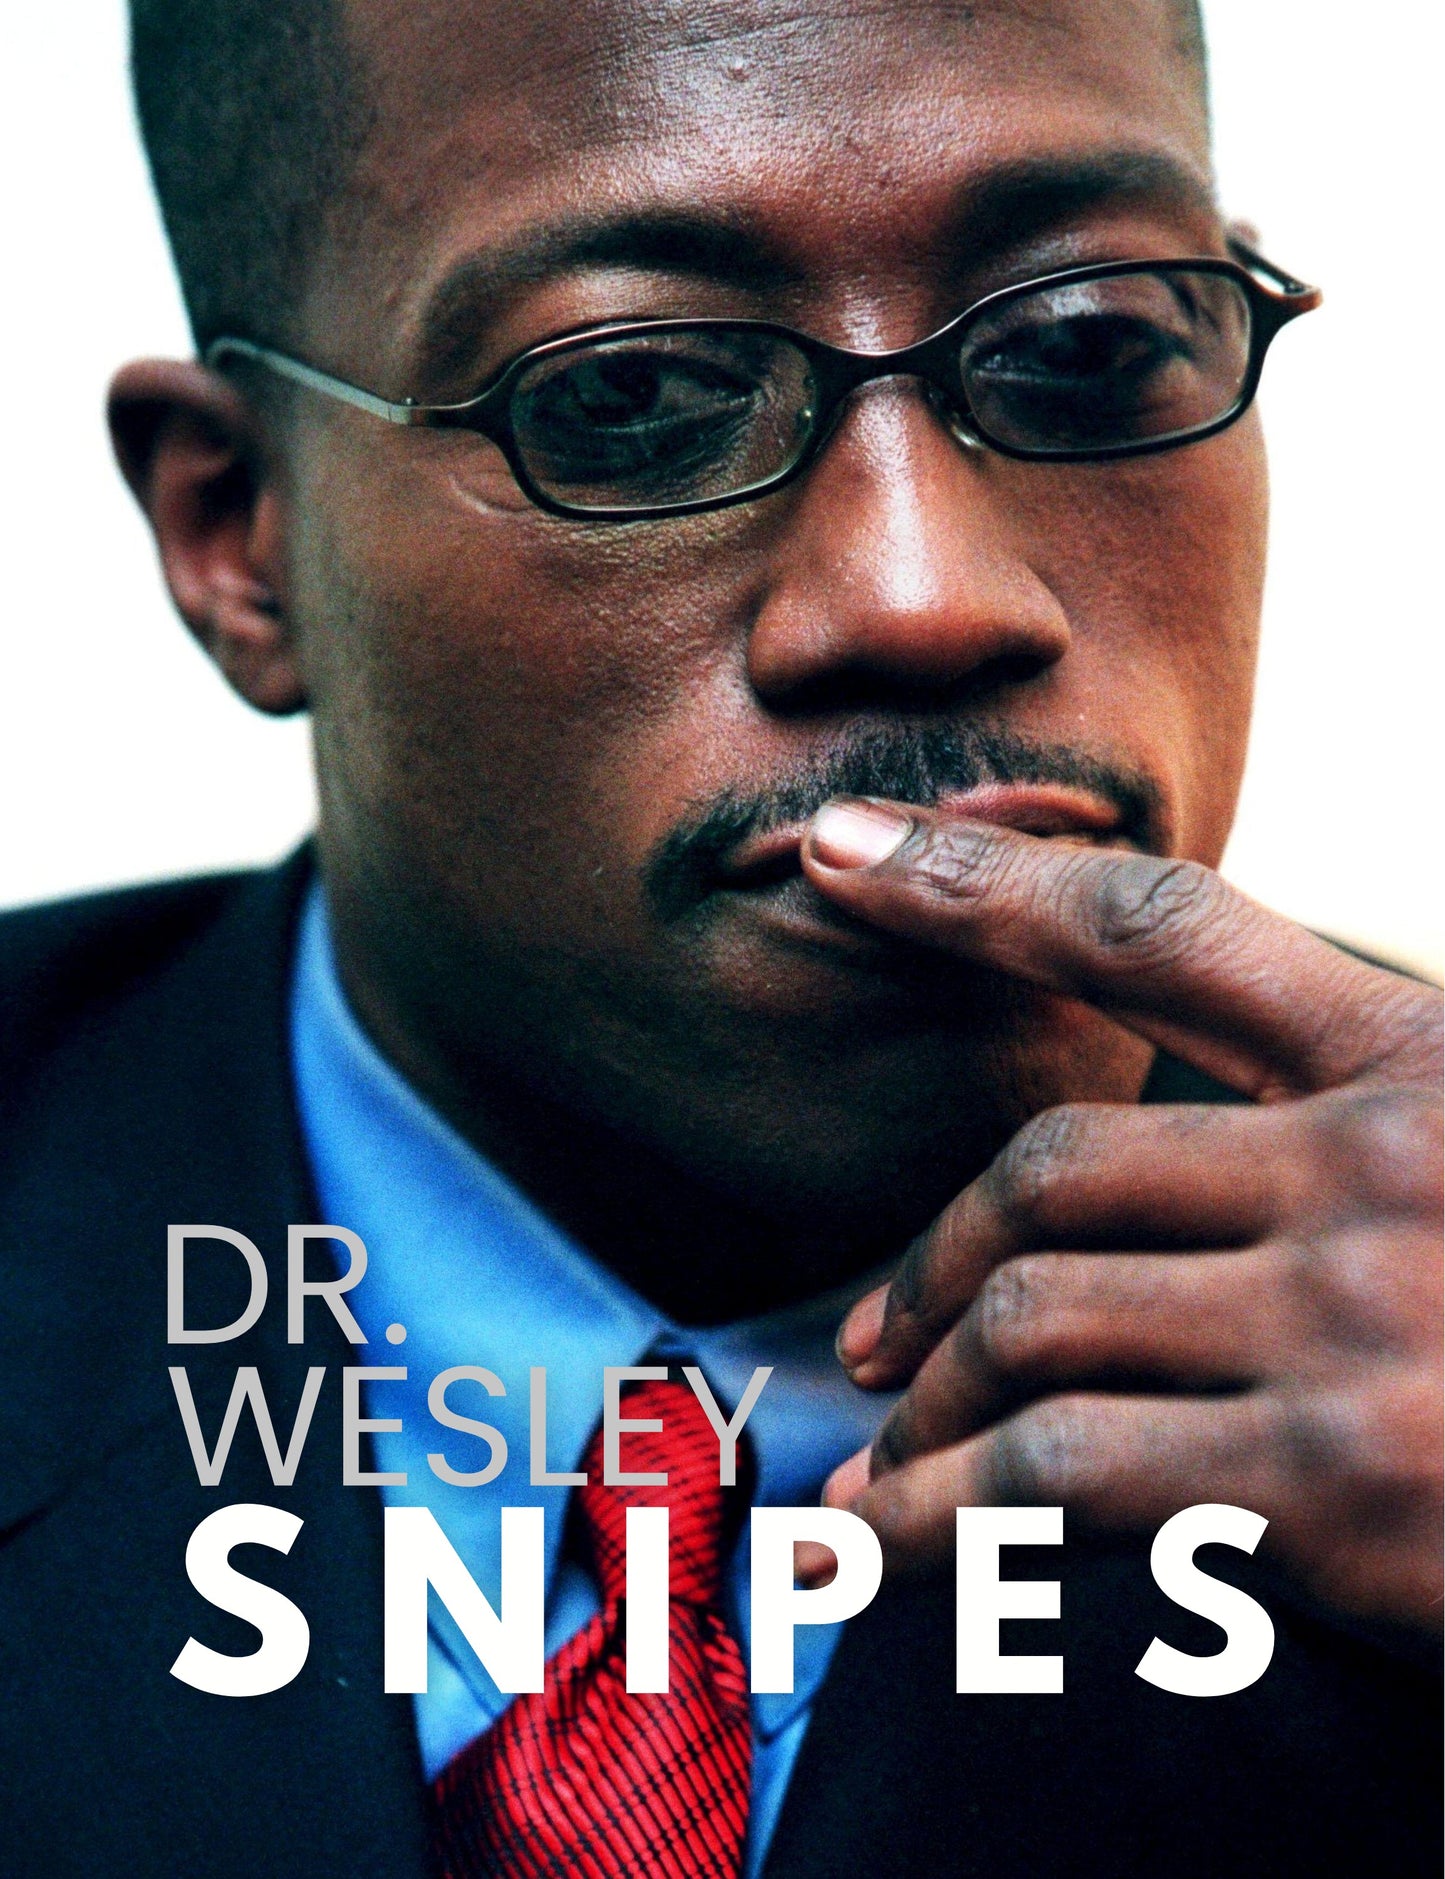 Deadly Art of Survival Magazine 6th Edition: Ft. Wesley Snipes (A Percentage Of Our Proceeds Will be Donated To AngelsLive) deadlyartofsurvival.com